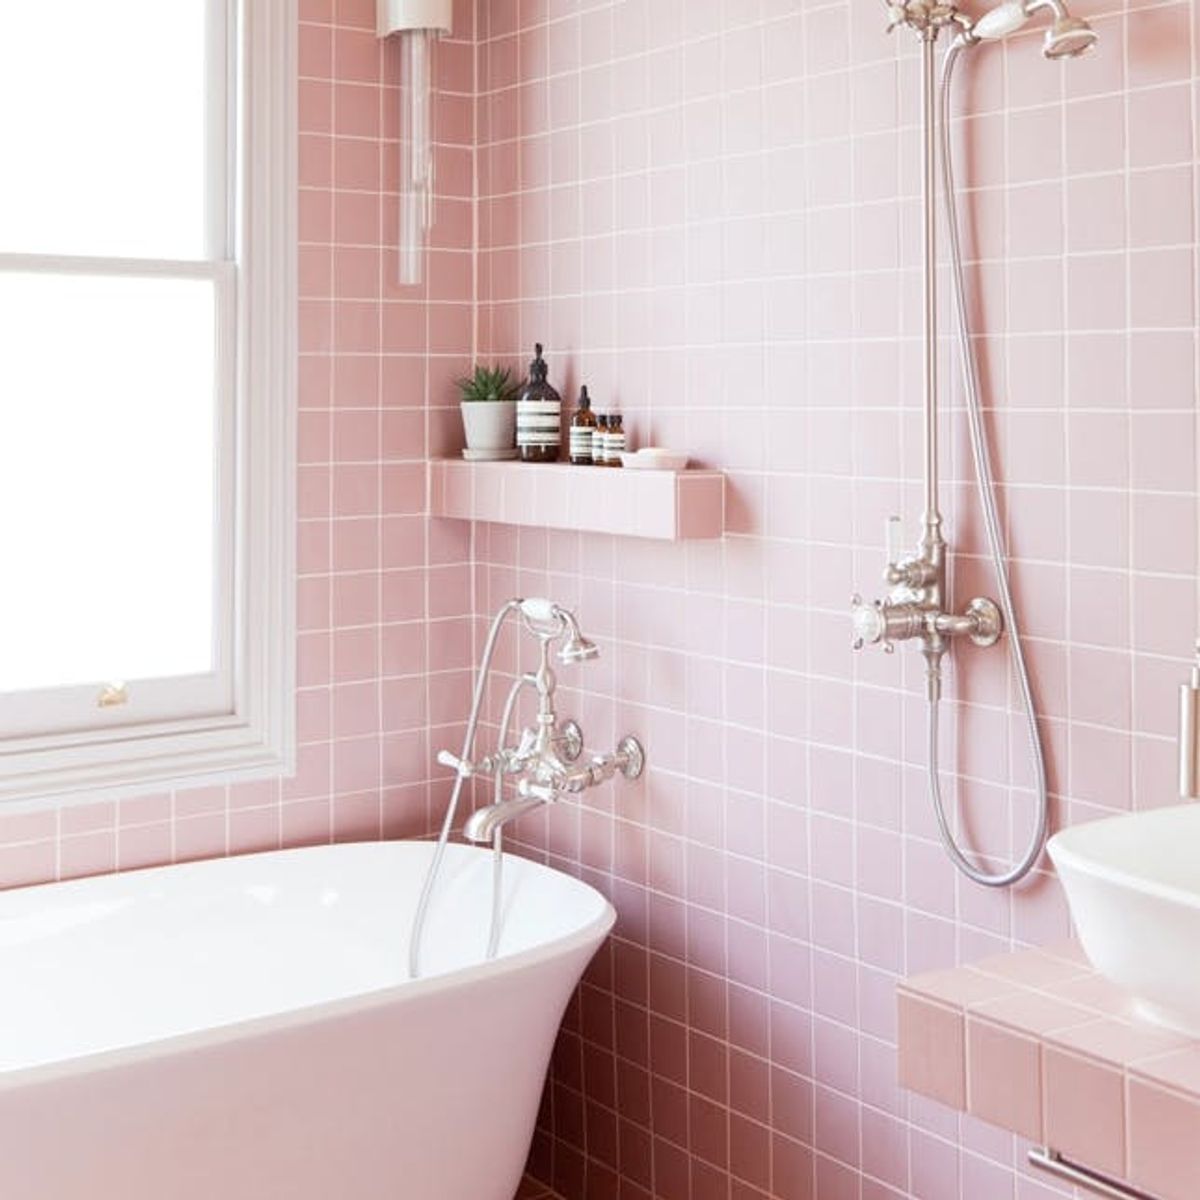 Gorgeous Statement Tile That Will Give You #BathroomEnvy